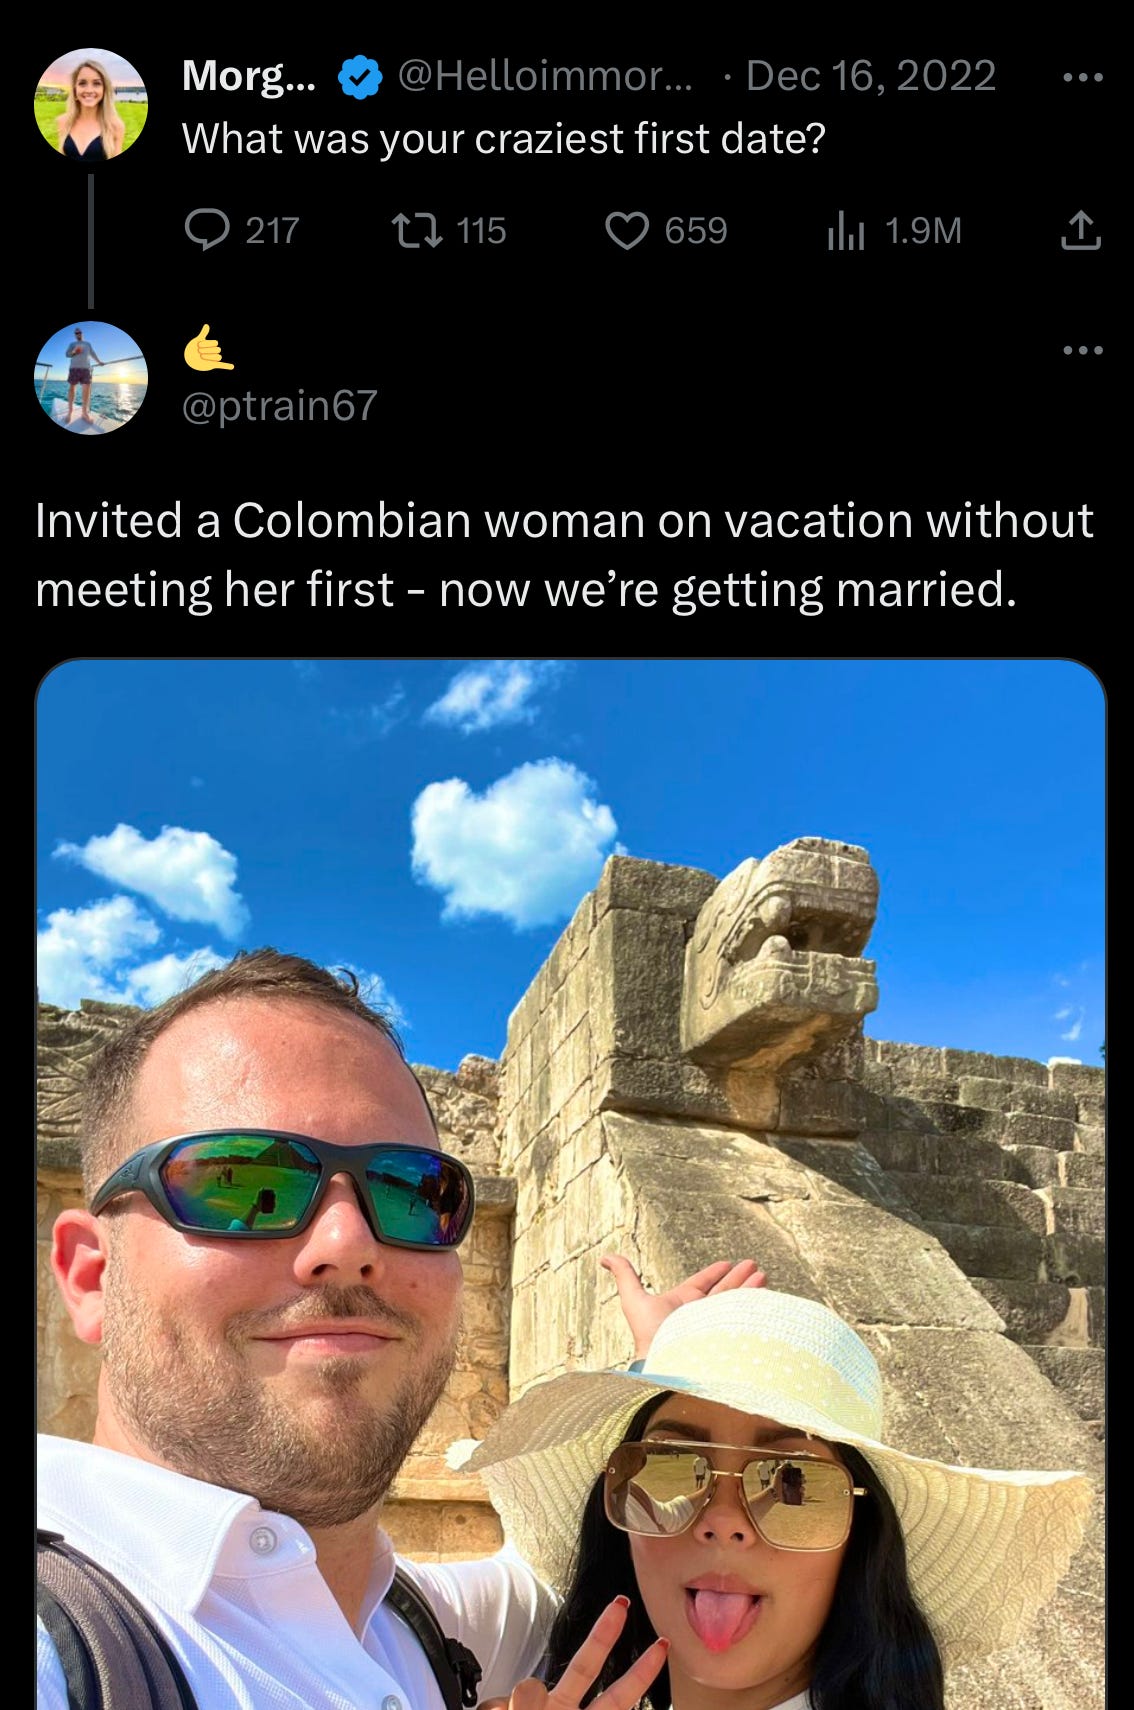 Reply to a “What was your craziest first date?” prompt tweet by @ptrain67: “Invited a Colombian woman on vacation without meeting her first - now we’re getting married.” Below is a selfie of a broey looking guy in sunglasses with a Columbian woman, both doing vcation-selfie type hand gestures. 